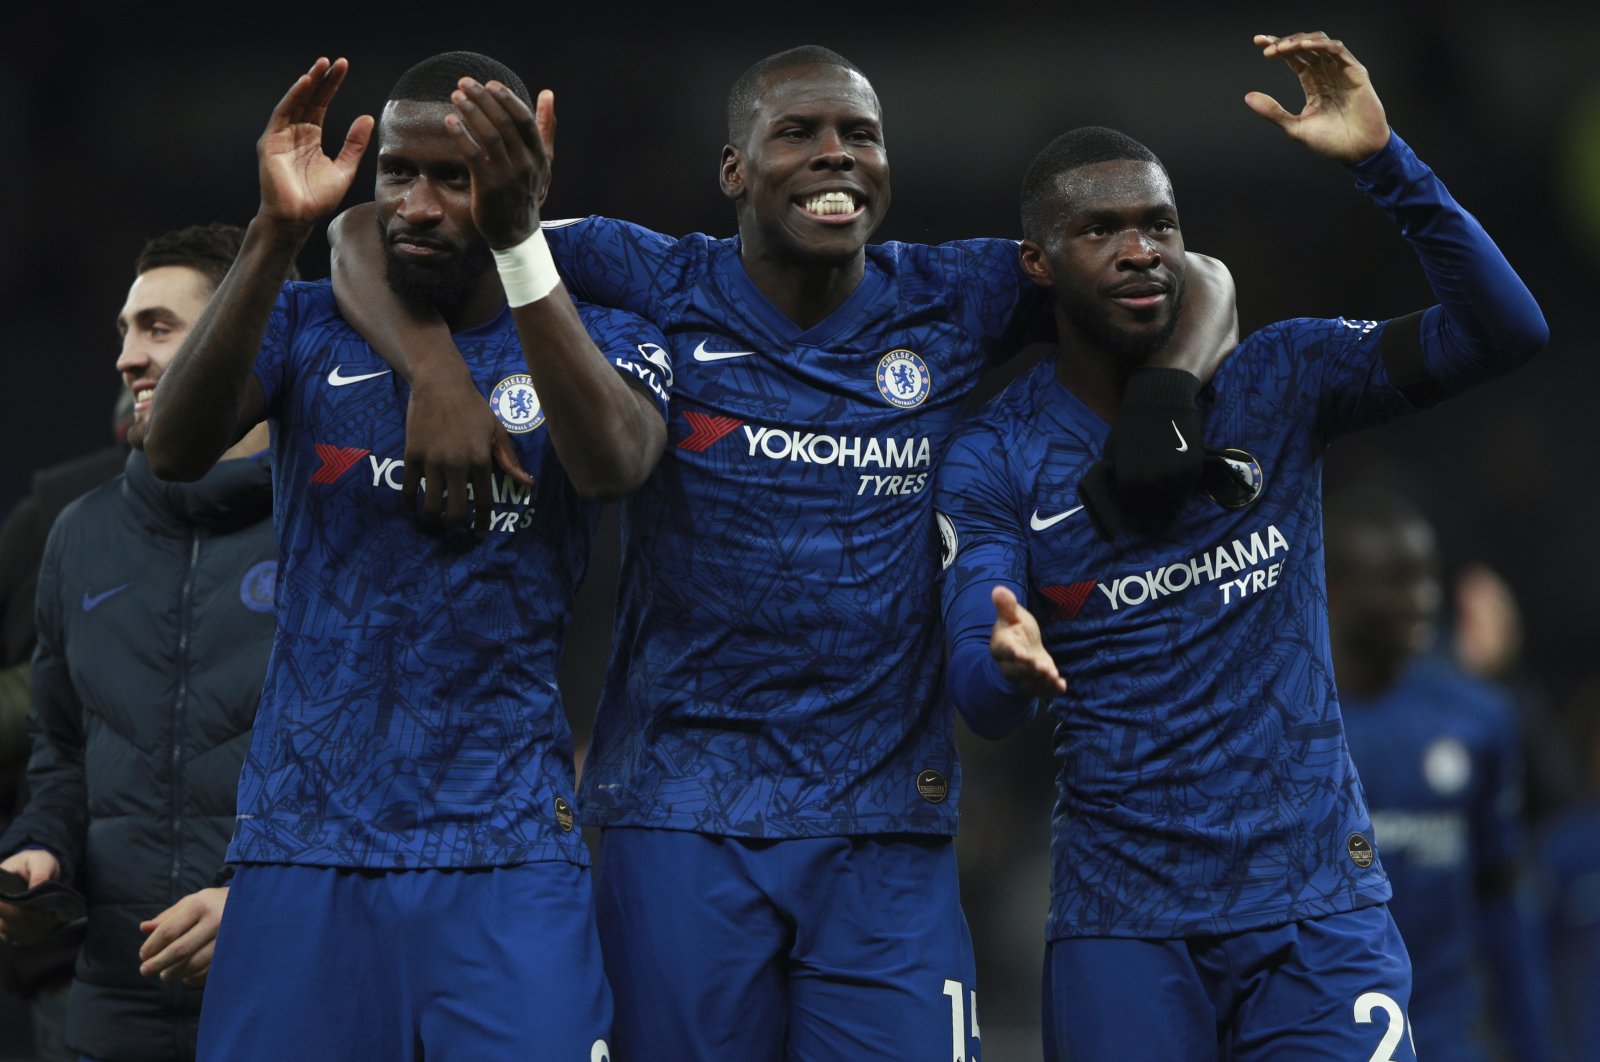 Chelsea's Antonio Rudiger (L) was allegedly the target of a racist attack after a match against Tottenham Hotspur in London, Britain, Dec. 22, 2019. (AP Photo)